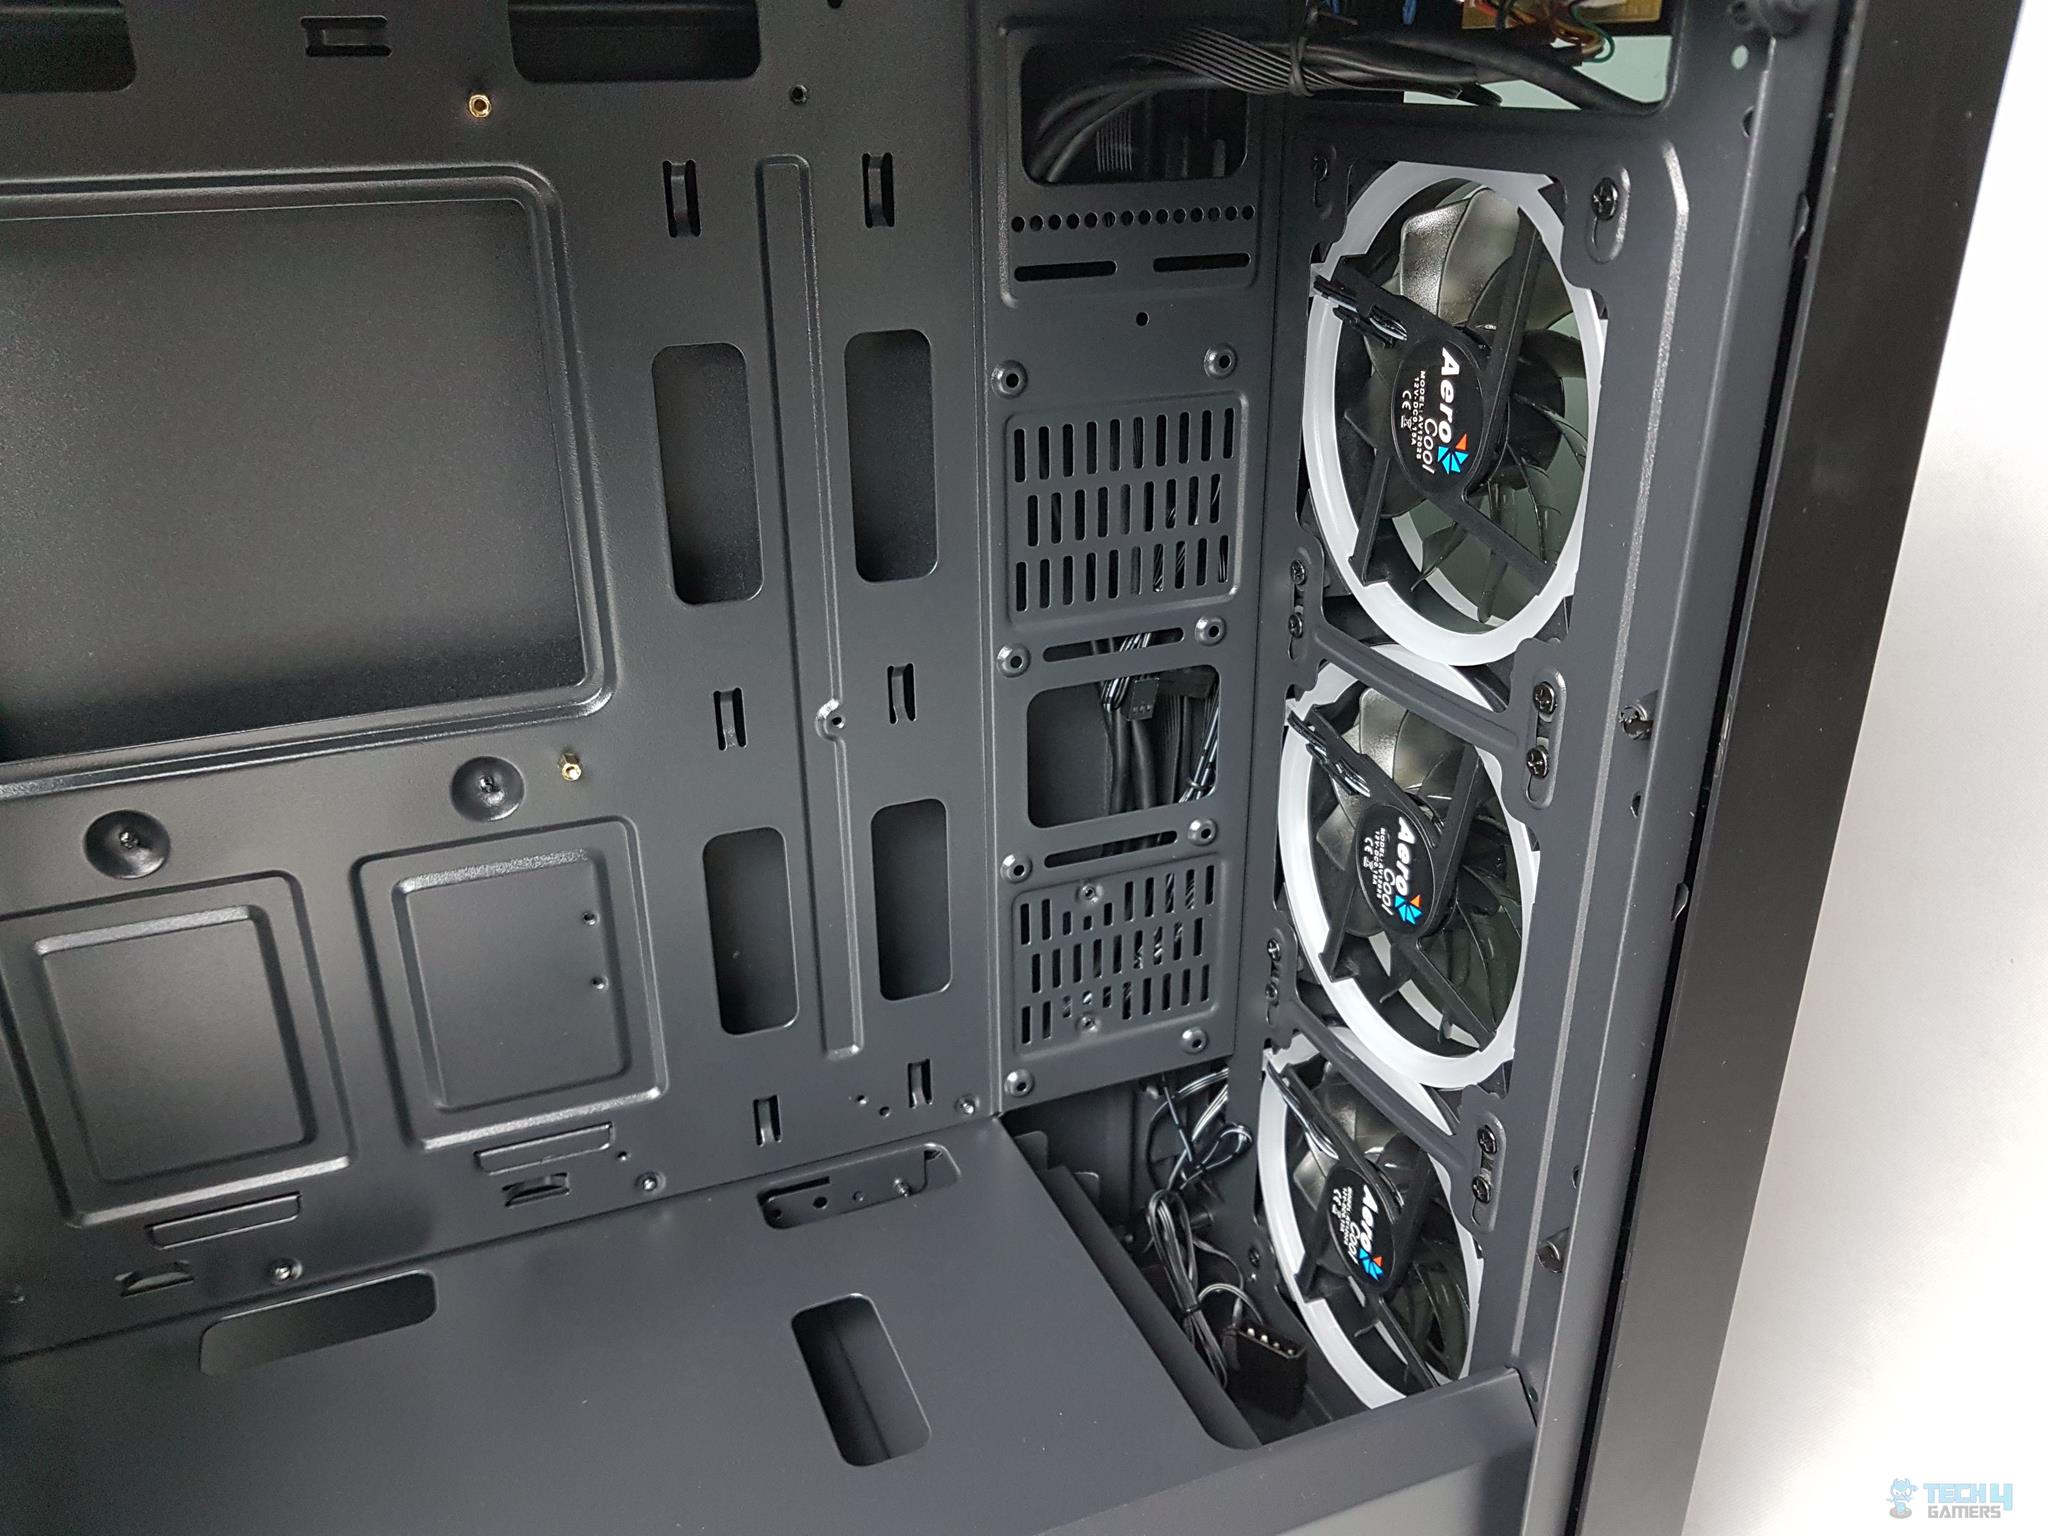  Aerocool Quartz Revo RGB Mid-Tower Chassis — The front-mounted fans